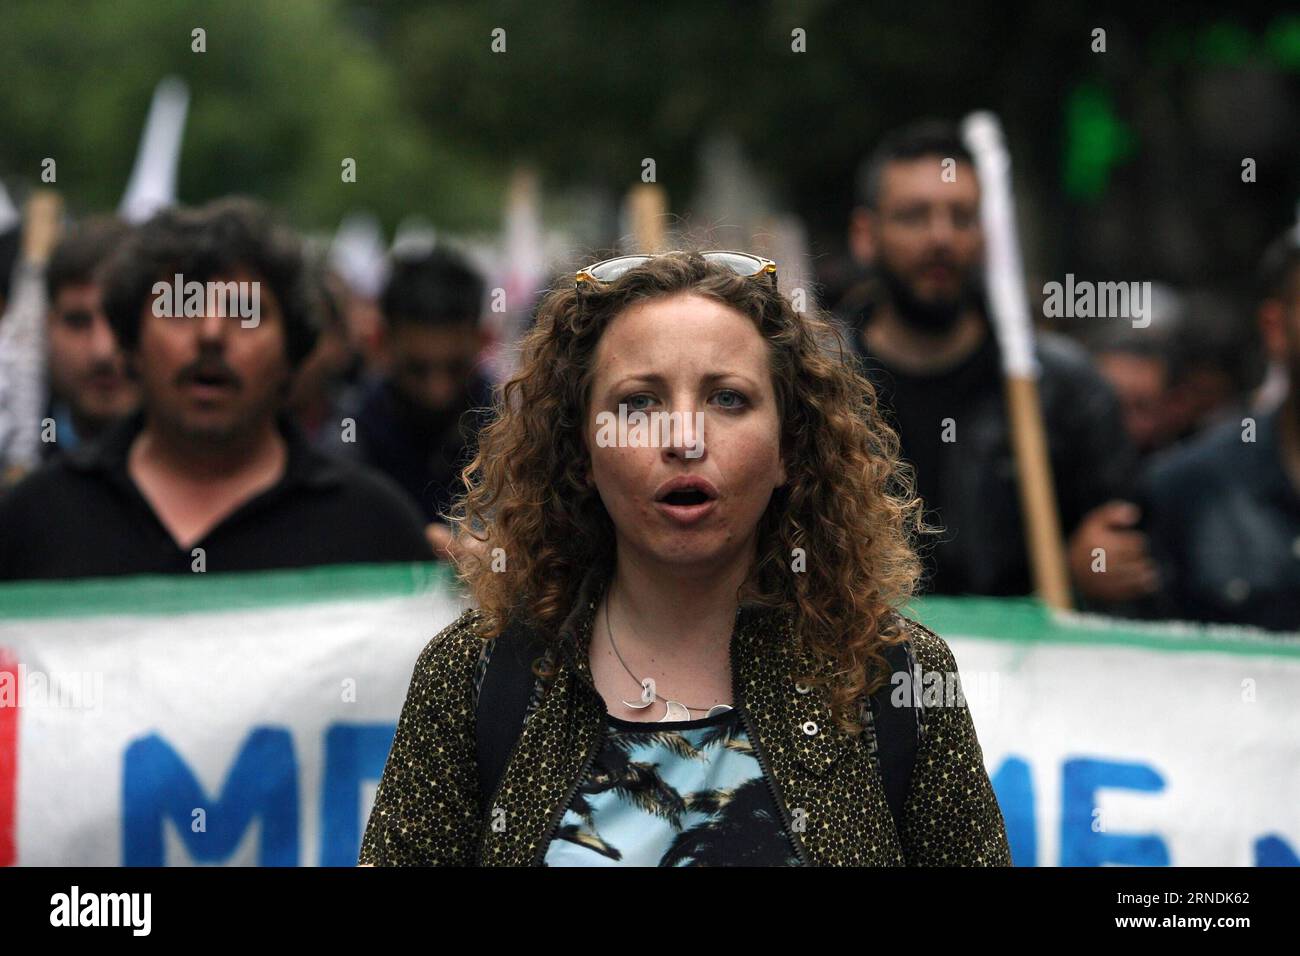 (160523) -- ATHENS, May 22, 2016 -- Demonstrators take part in a protest in Athens, Greece, May 22, 2016. Approximately 11,000 demonstrators, according to police estimates, participated in the rallies staged by labor unions to protest against an omnibus bill. The critical multi-bill containing the last set of prior actions demanded by Greece s creditors to complete the first review of the Greek third program, unlock the next bailout tranche and open the way to debt relief talks was approved by the majority of Greek legislators on Sunday. ) GREECE-ATHENS-POLITICS-PROTEST MariosxLolos PUBLICATIO Stock Photo